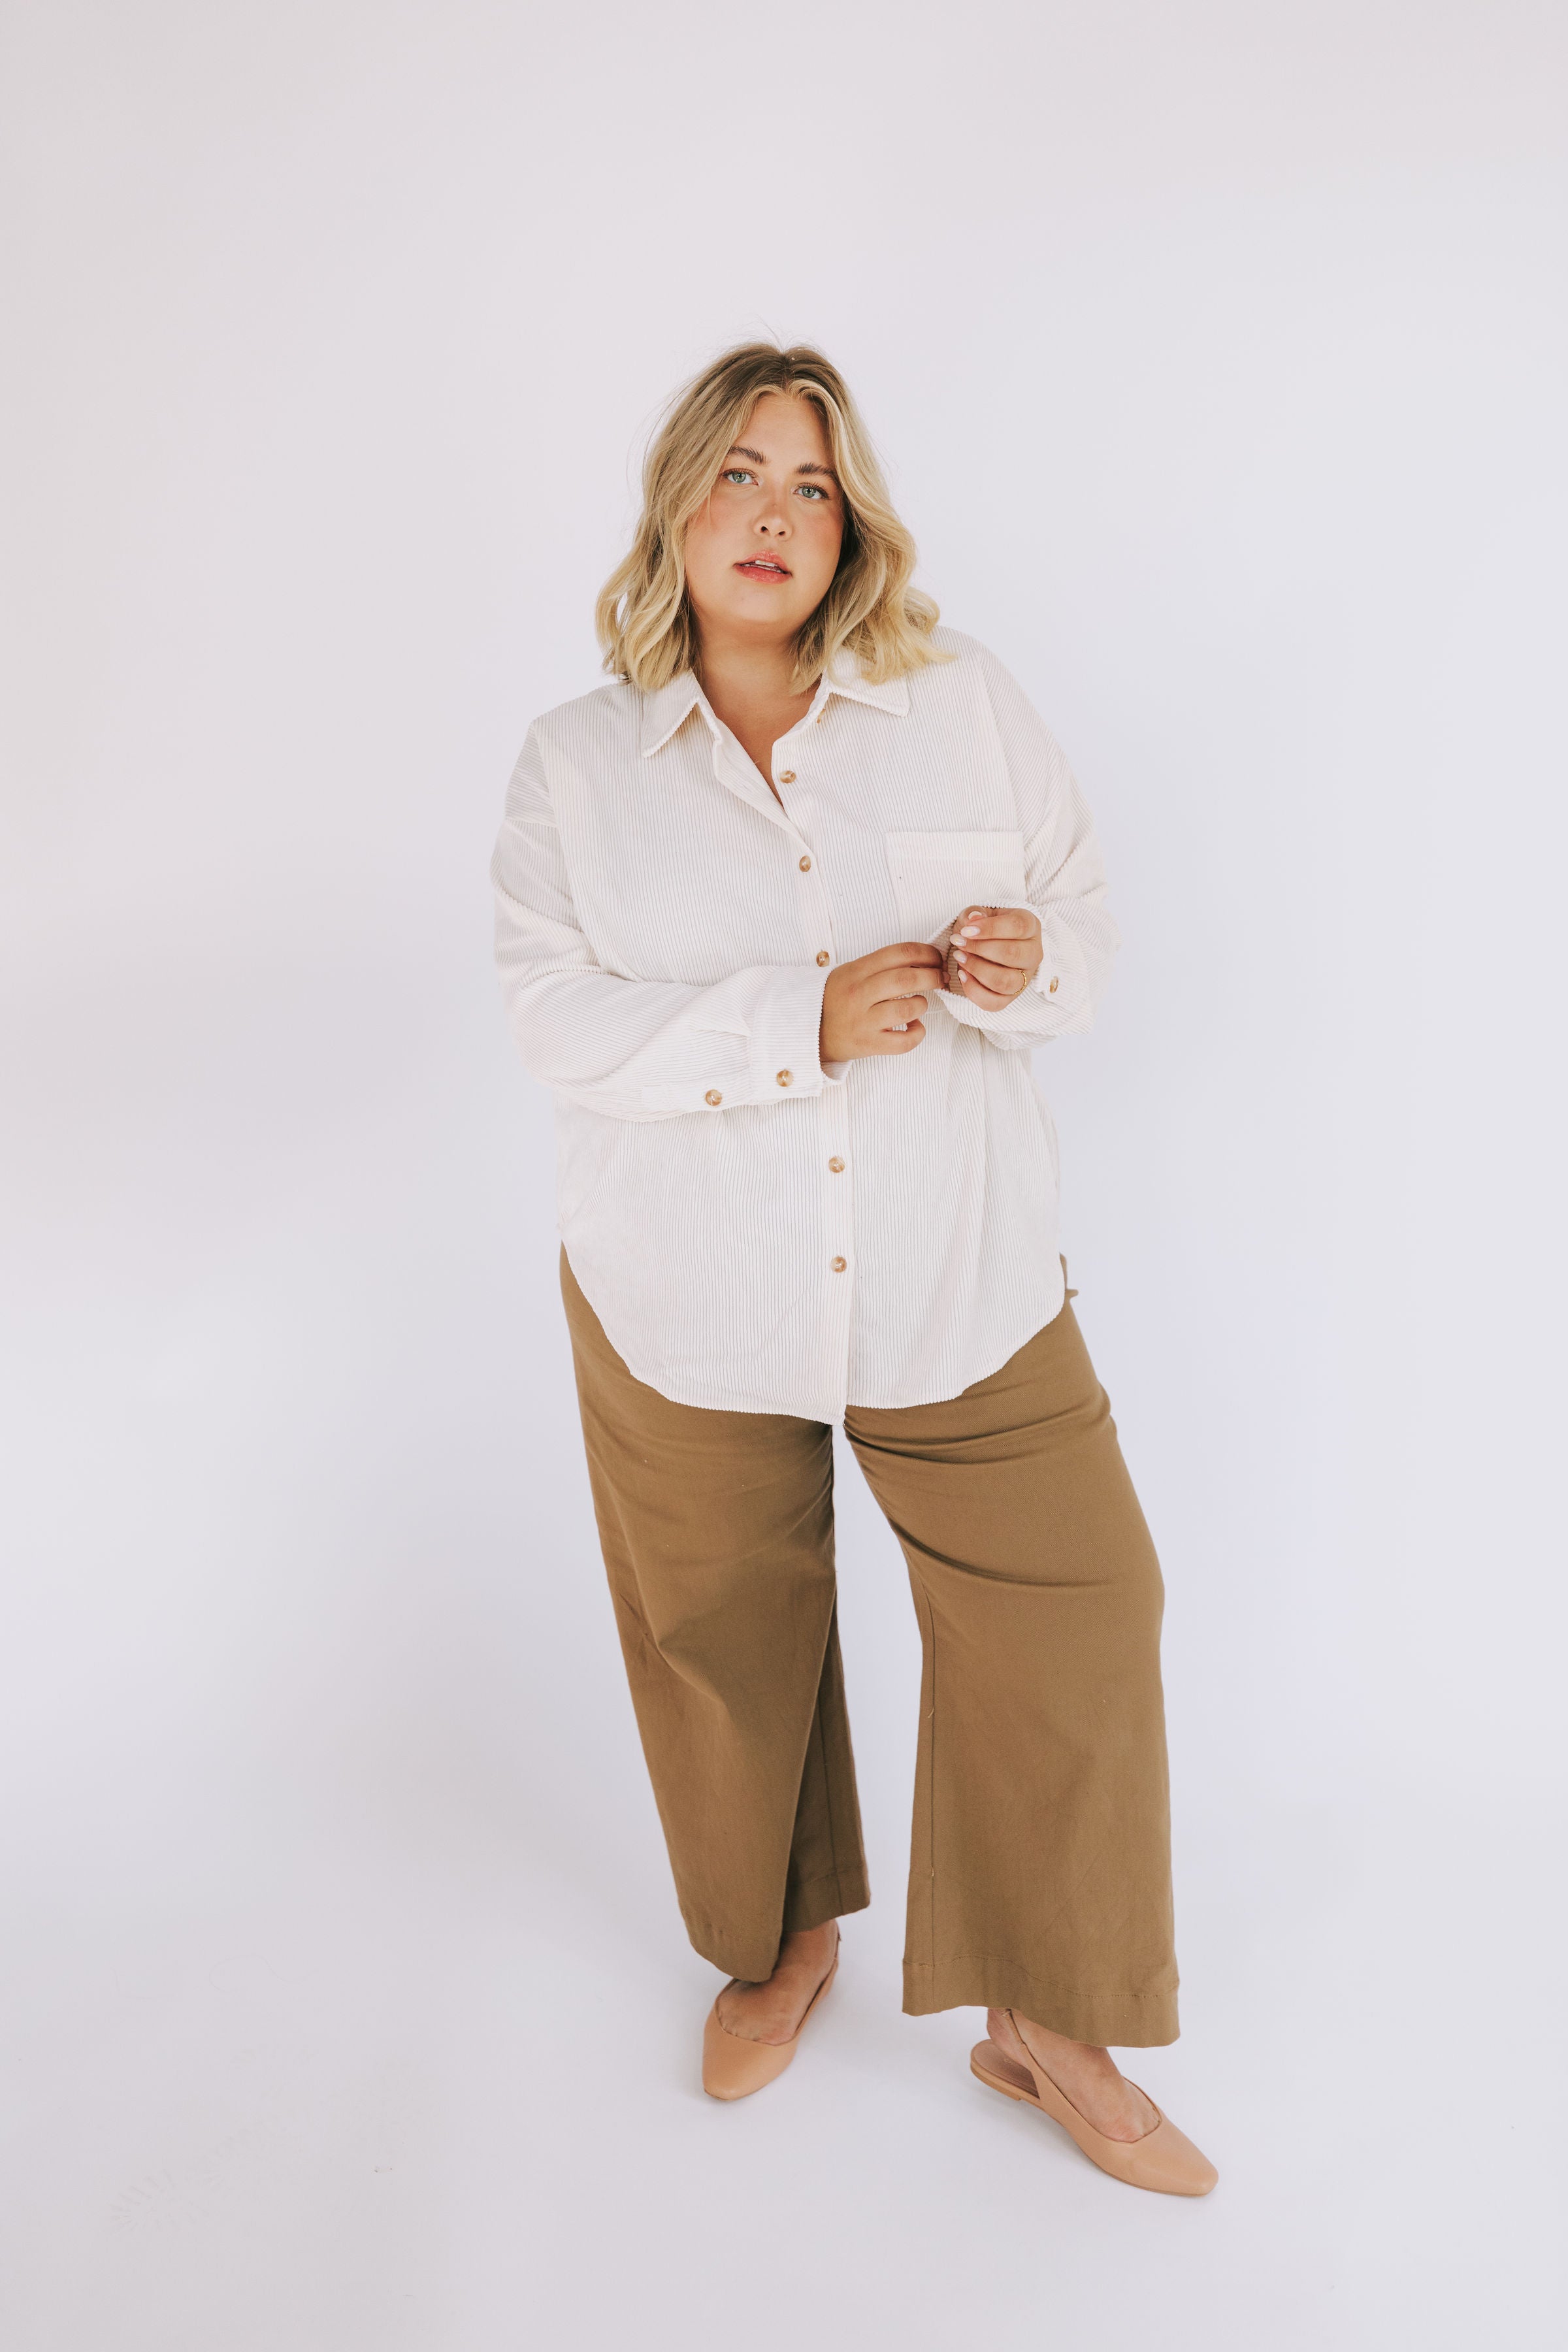 PLUS SIZE - Live Life Fully Top